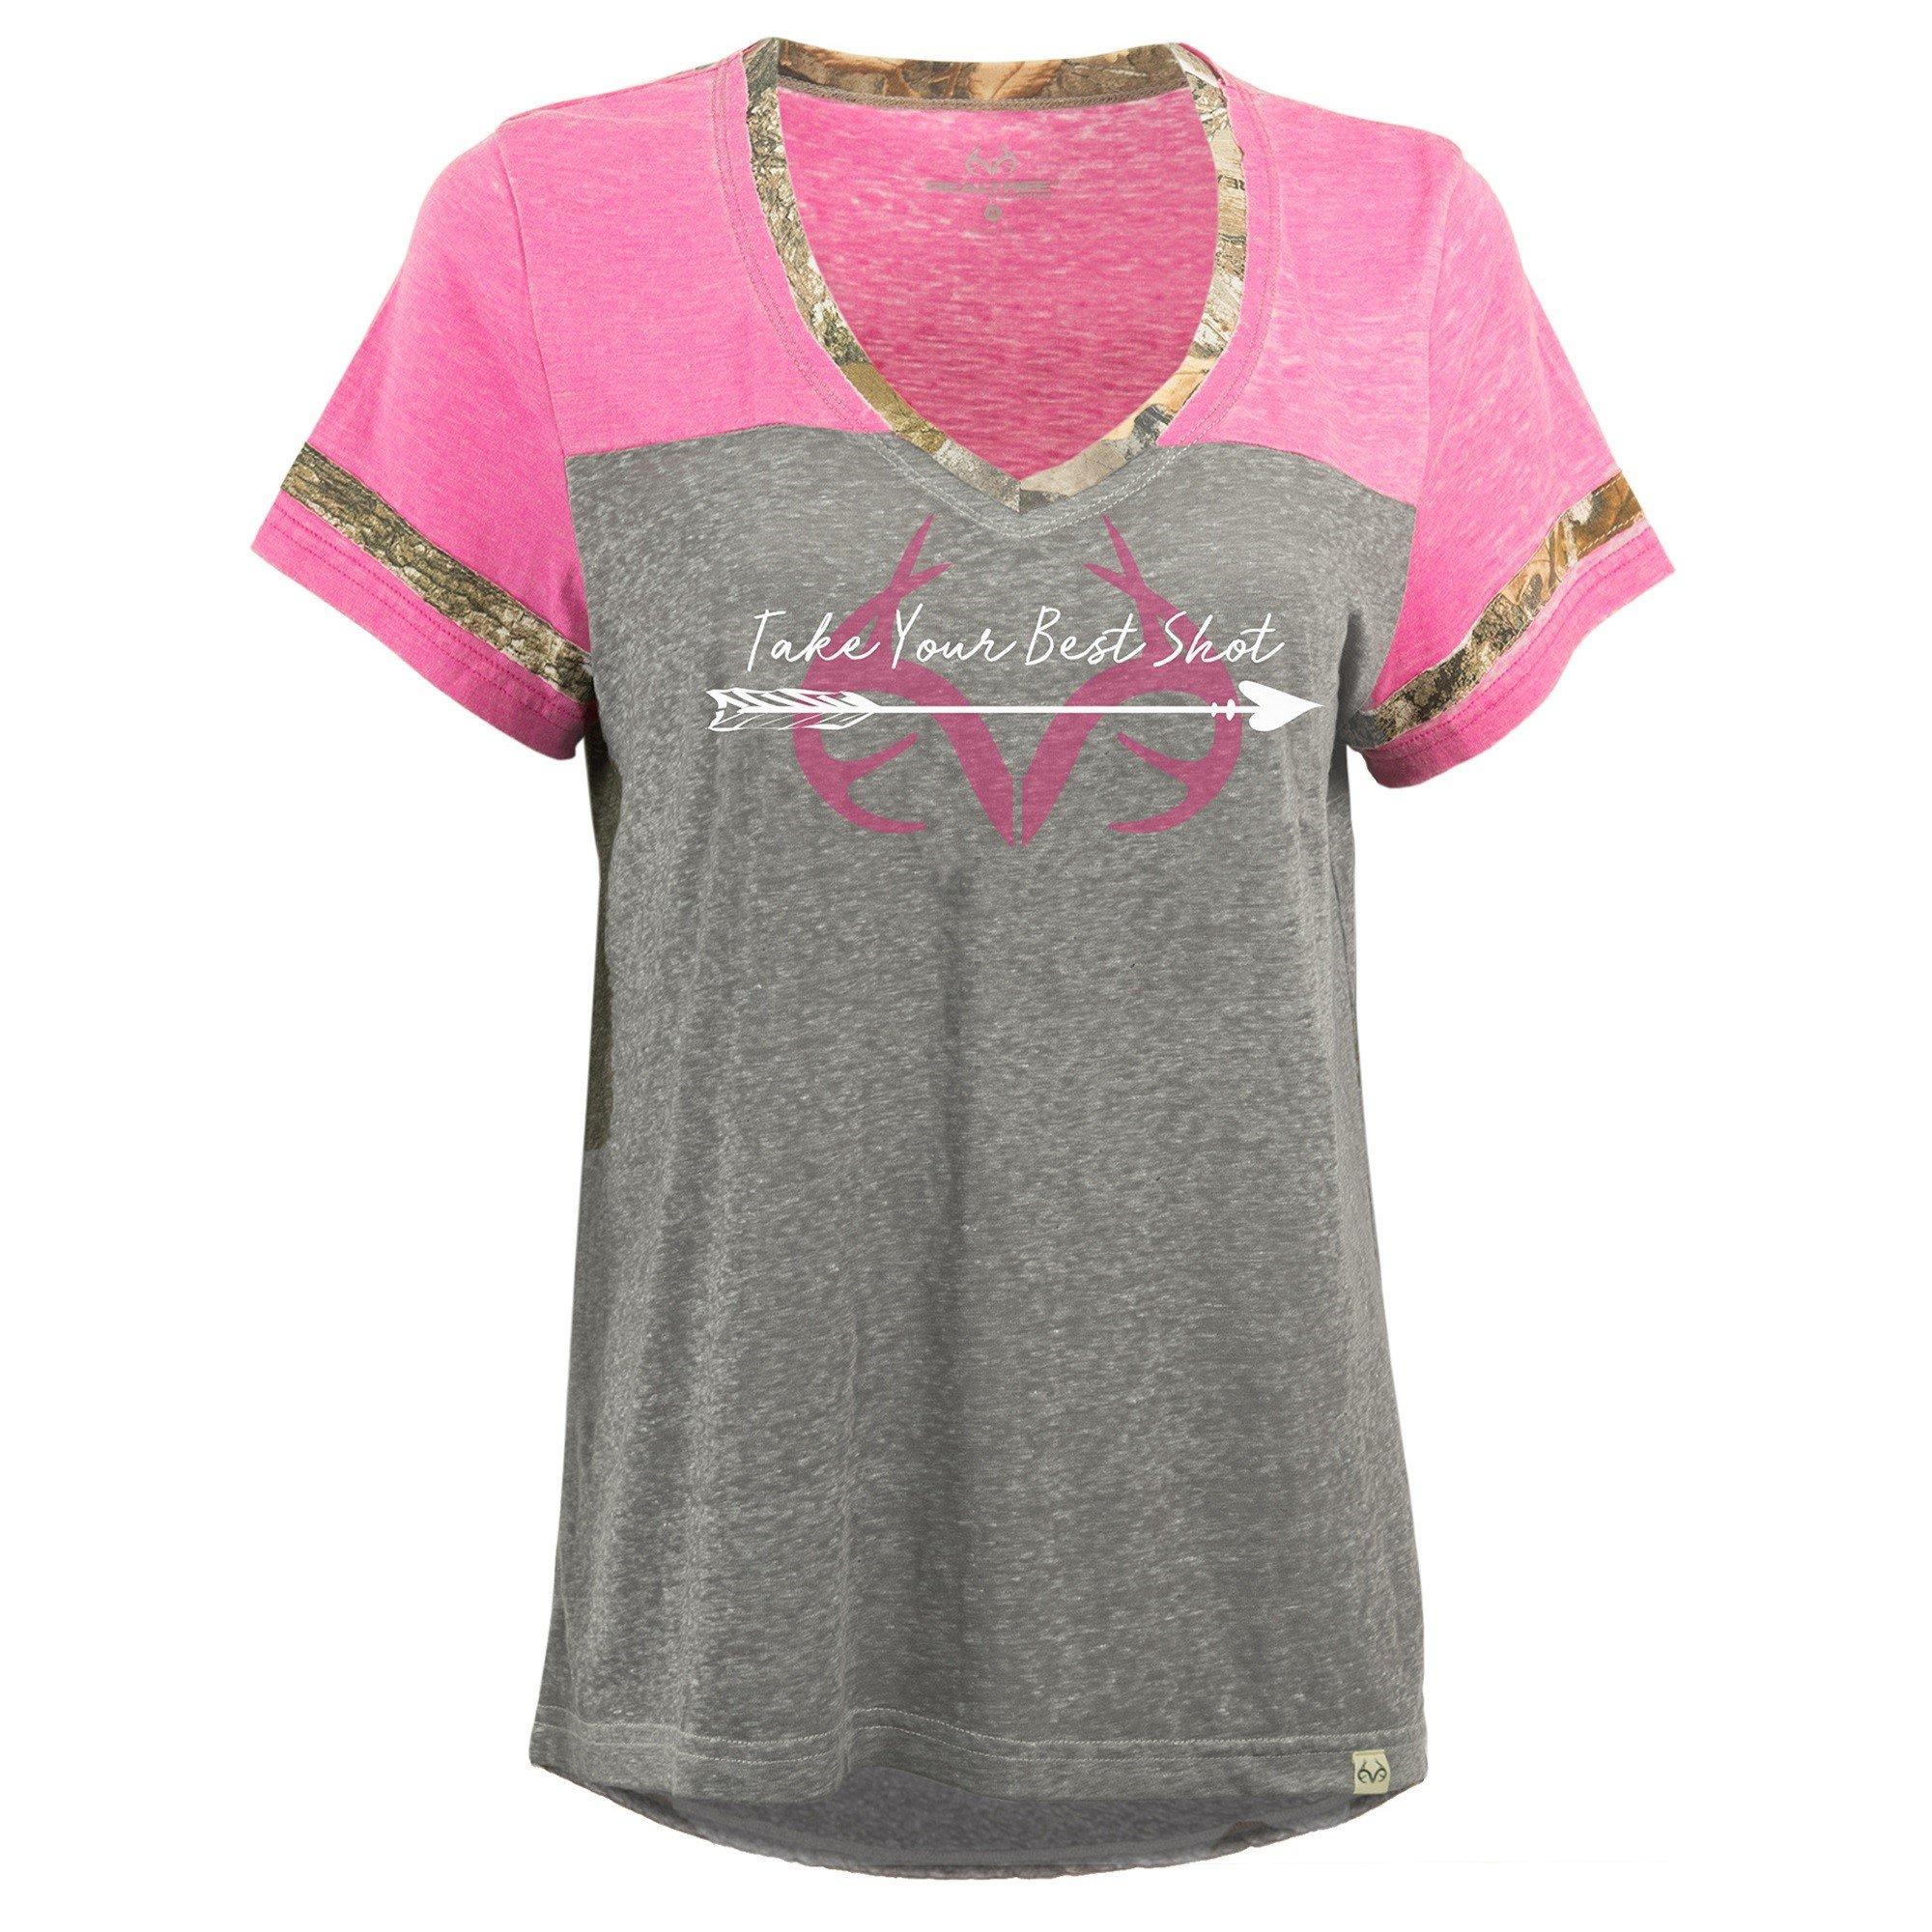 Women's Realtree Clover Short Sleeve Burnout Graphic Tee